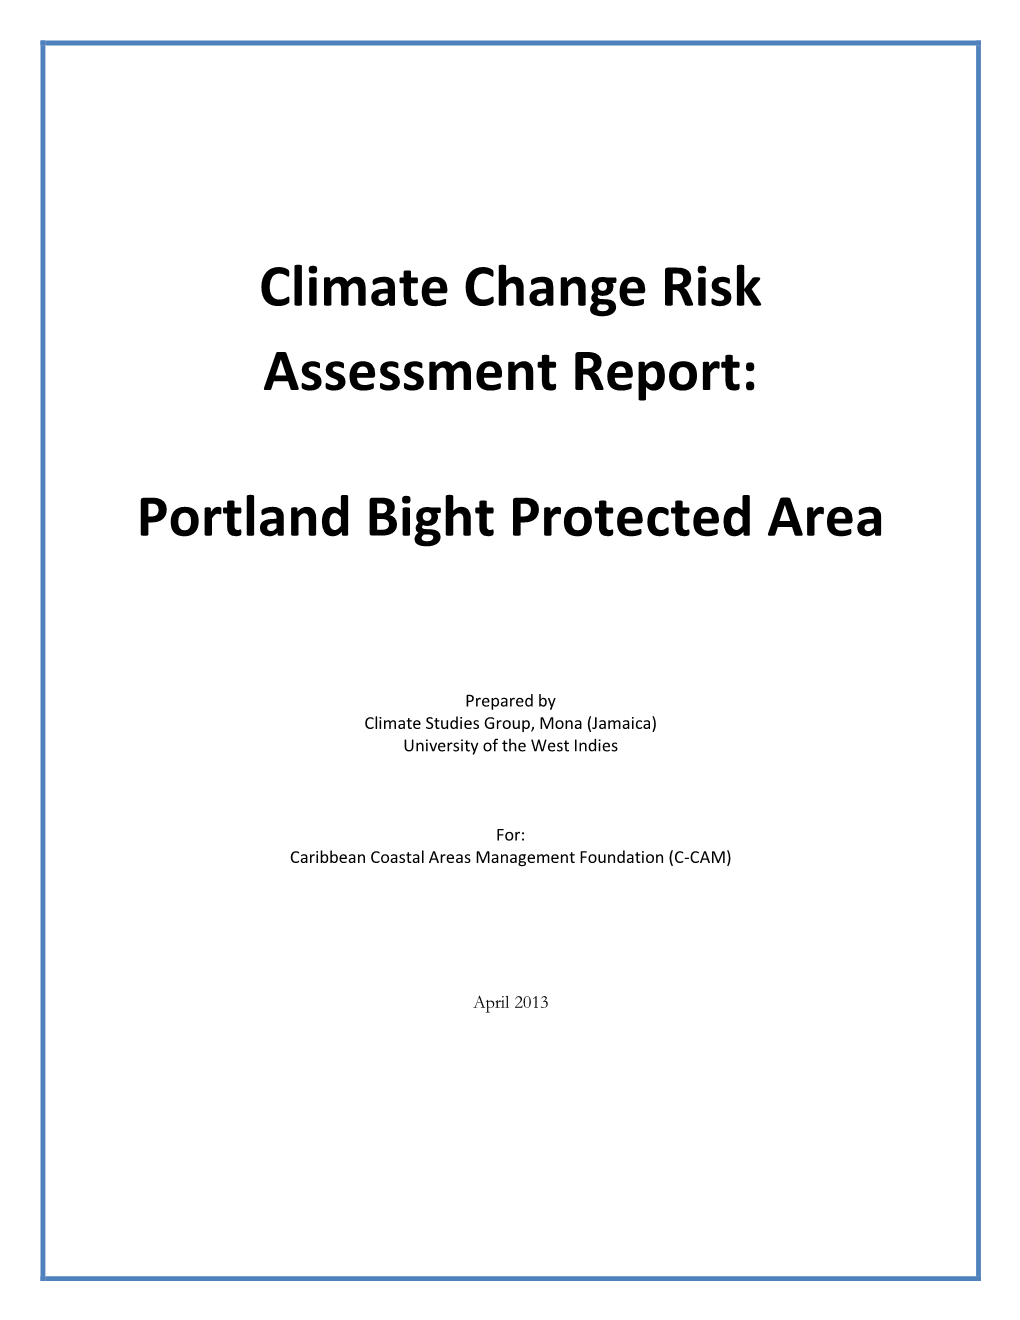 Climate Change Risk Assessment Report: Portland Bight Protected Area